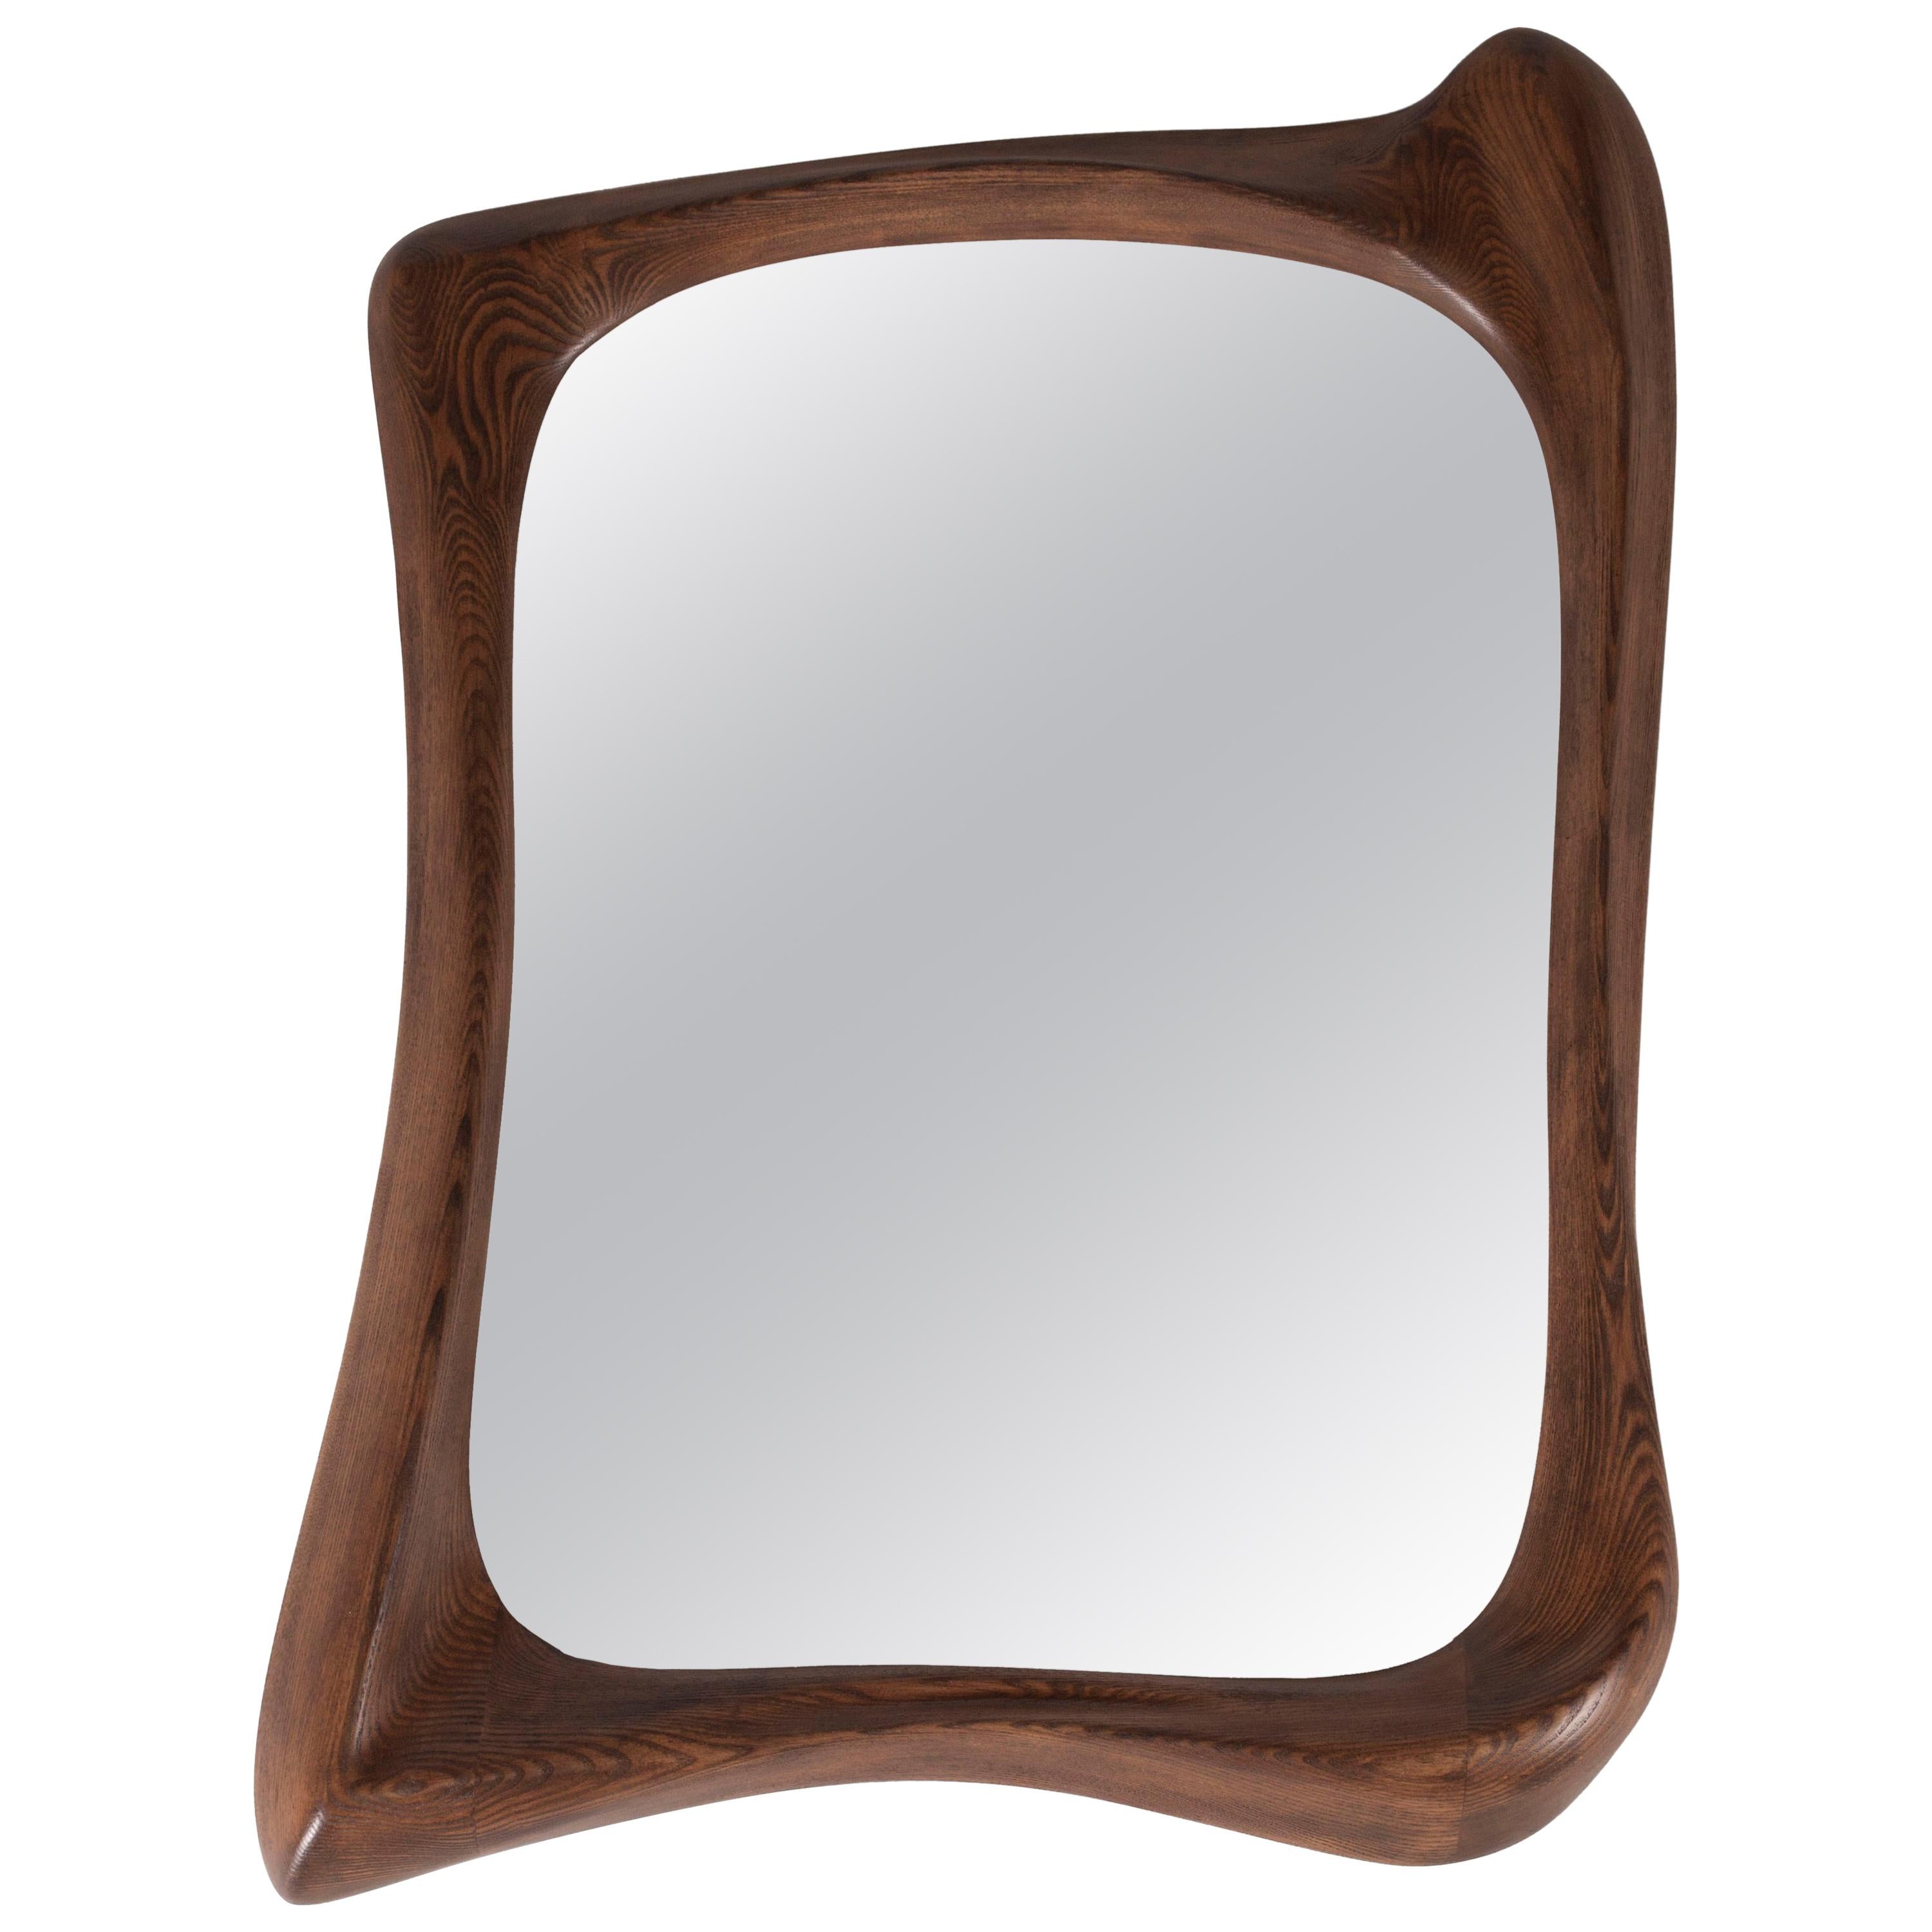 Amorph Narcissus Mirror in Graphite Walnut stain on Ash wood For Sale